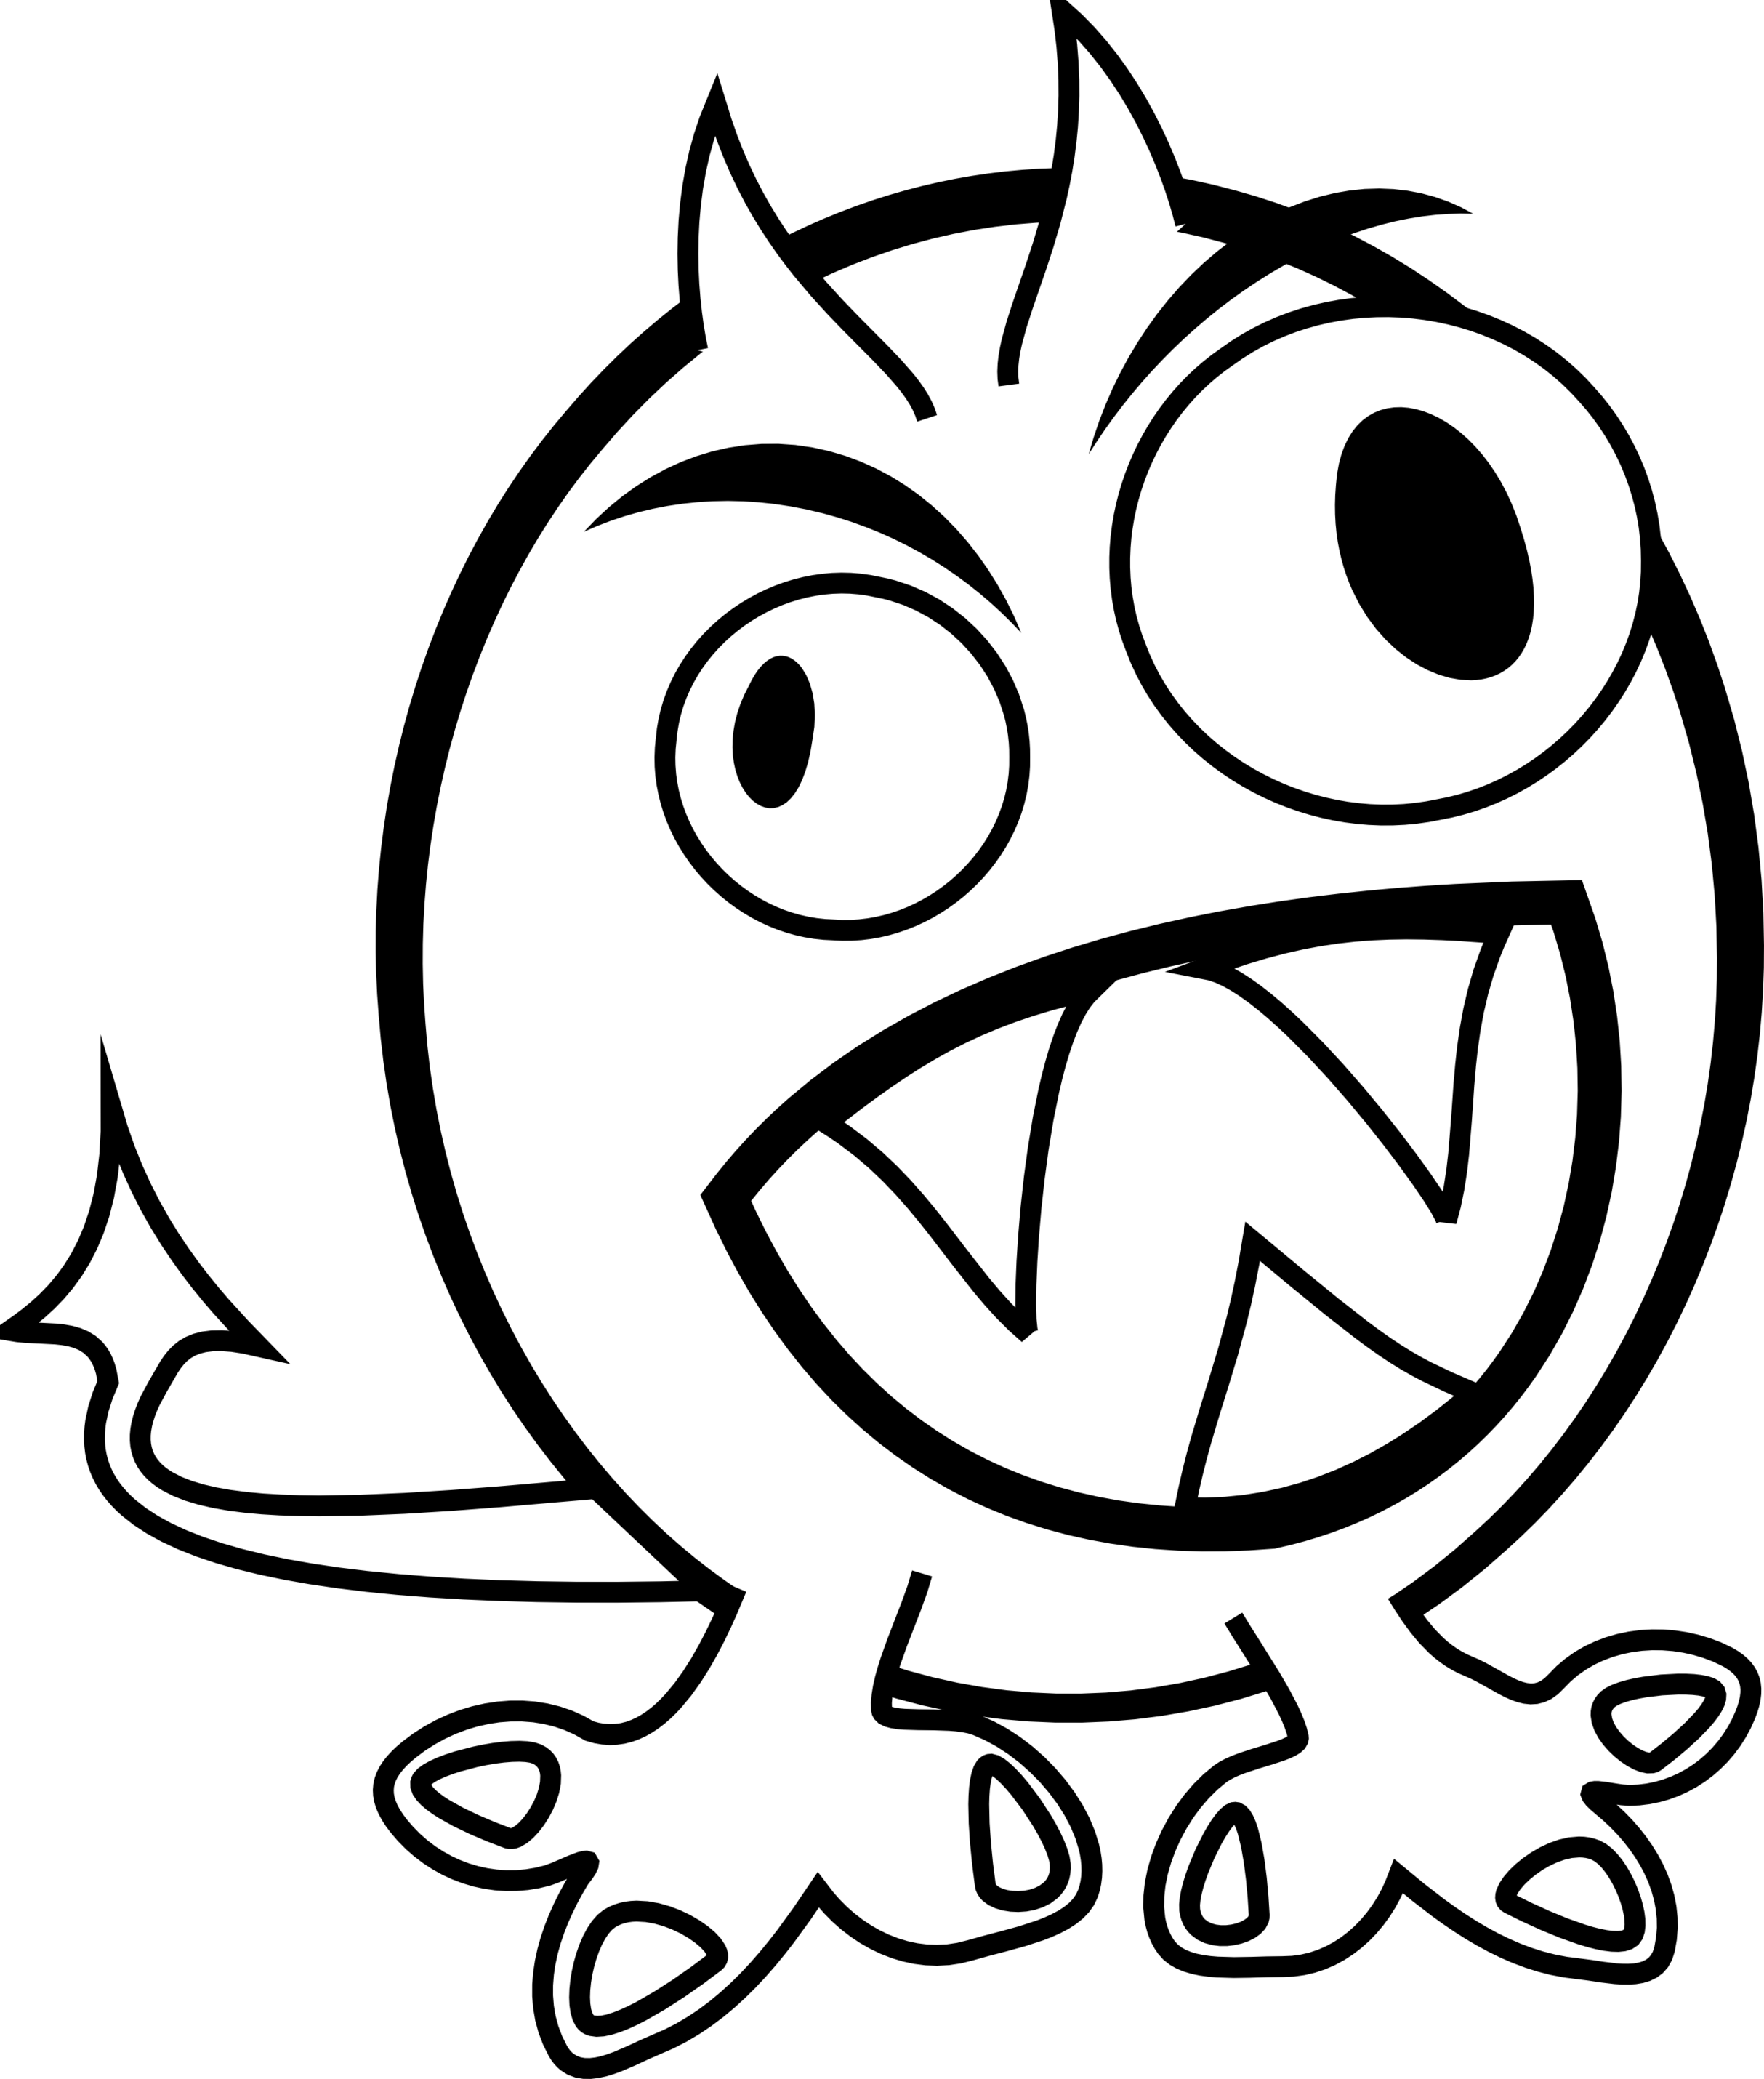 Clip Art Small Funny Angry Monster Black White Clipart - Free to ...